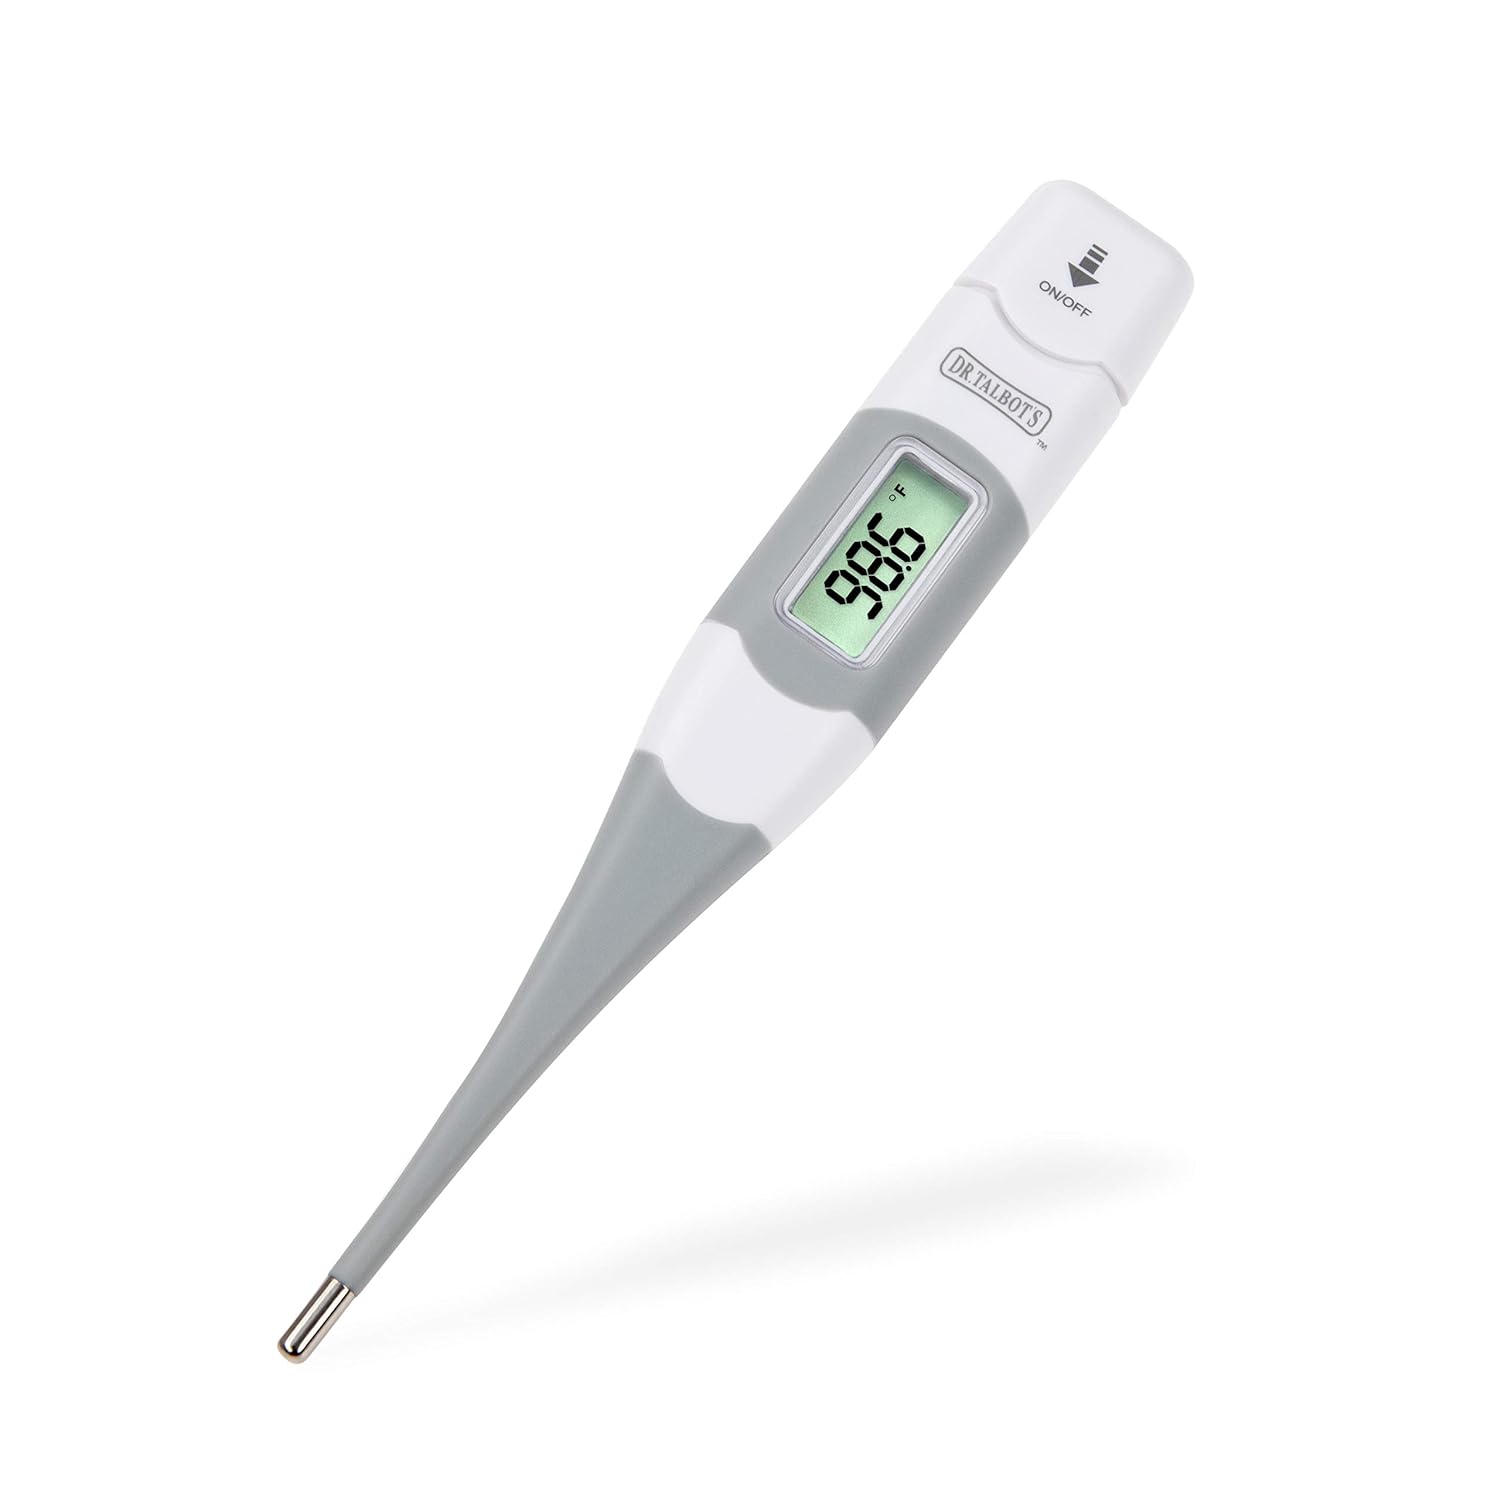 Dr. Talbot's Flex Tip Digital Thermometer with Protective Case - Fahrenheit and Celsius Digital Read Baby Thermometer - 3+ Months : Baby